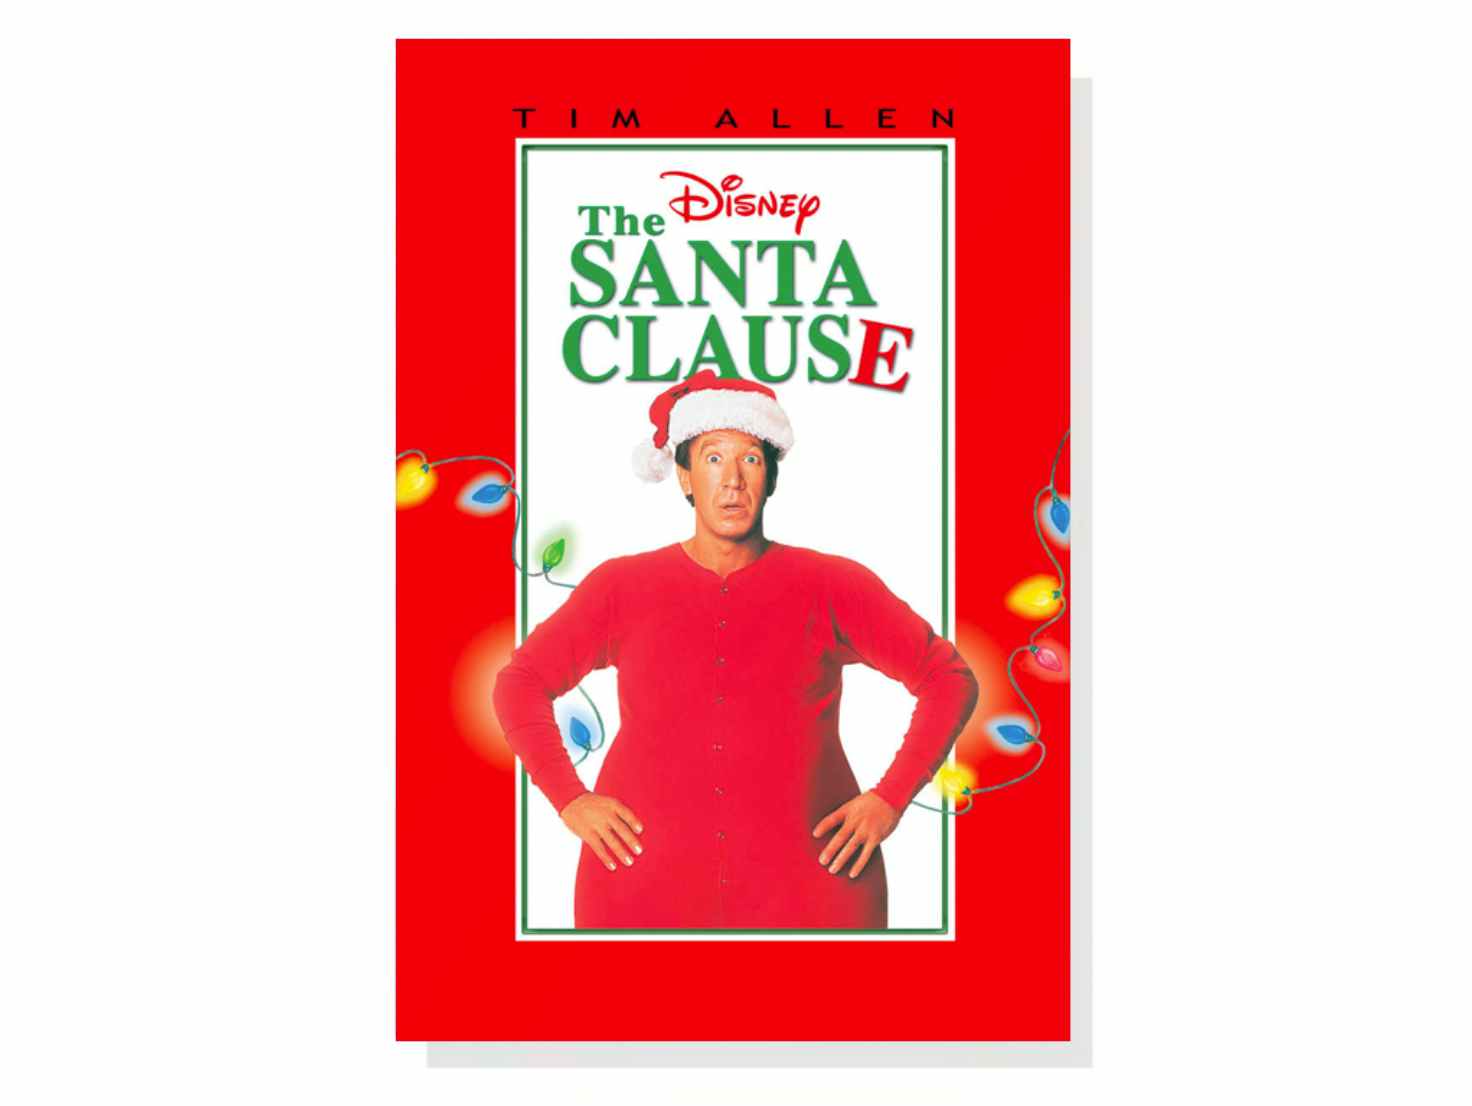 Movie poster for The Santa Clause, one of the best Christmas movies on Disney Plus.